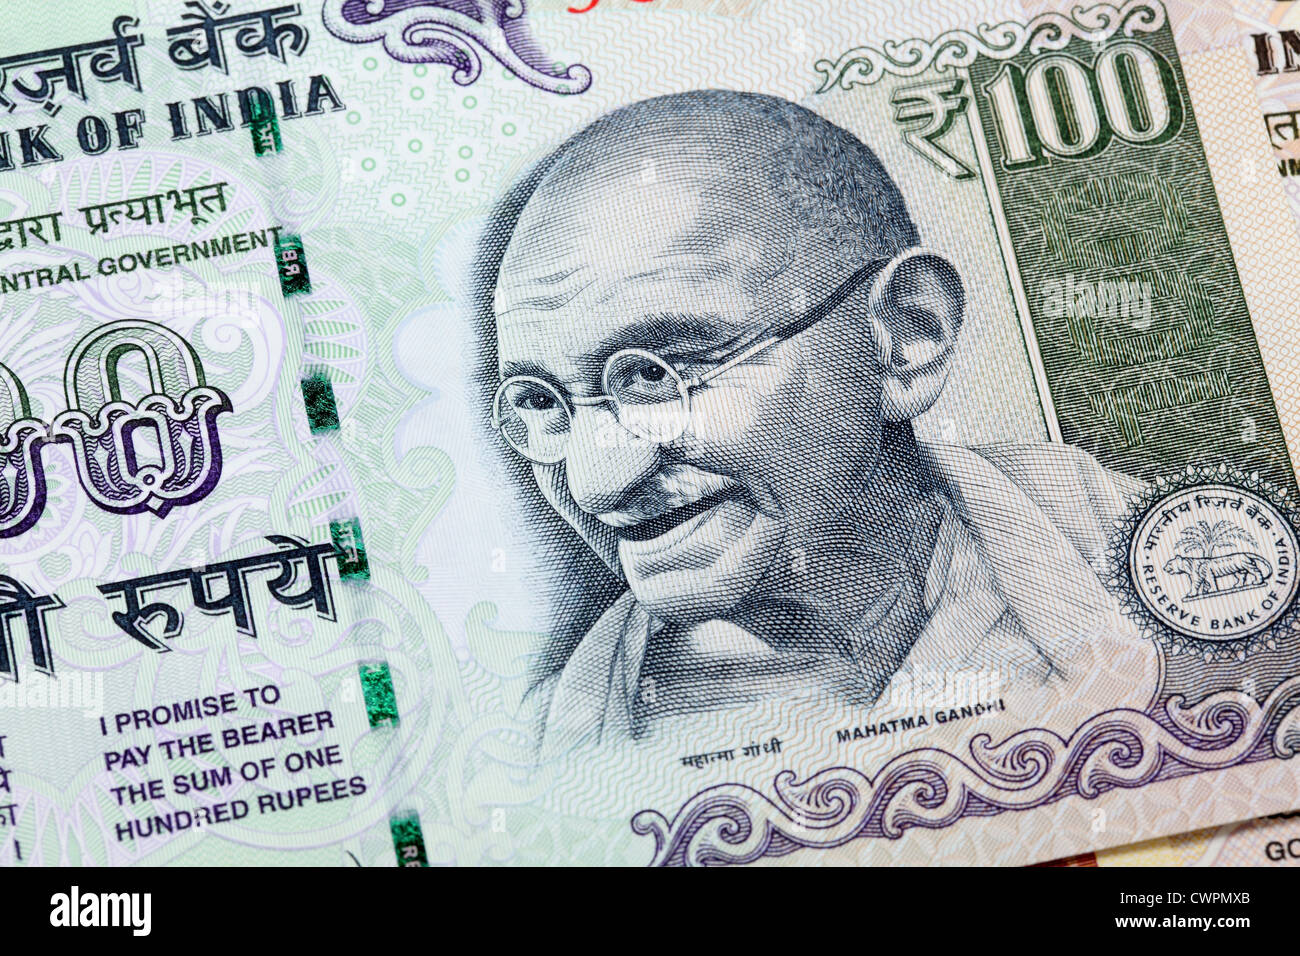 Indian Rupee notes background Stock Photo